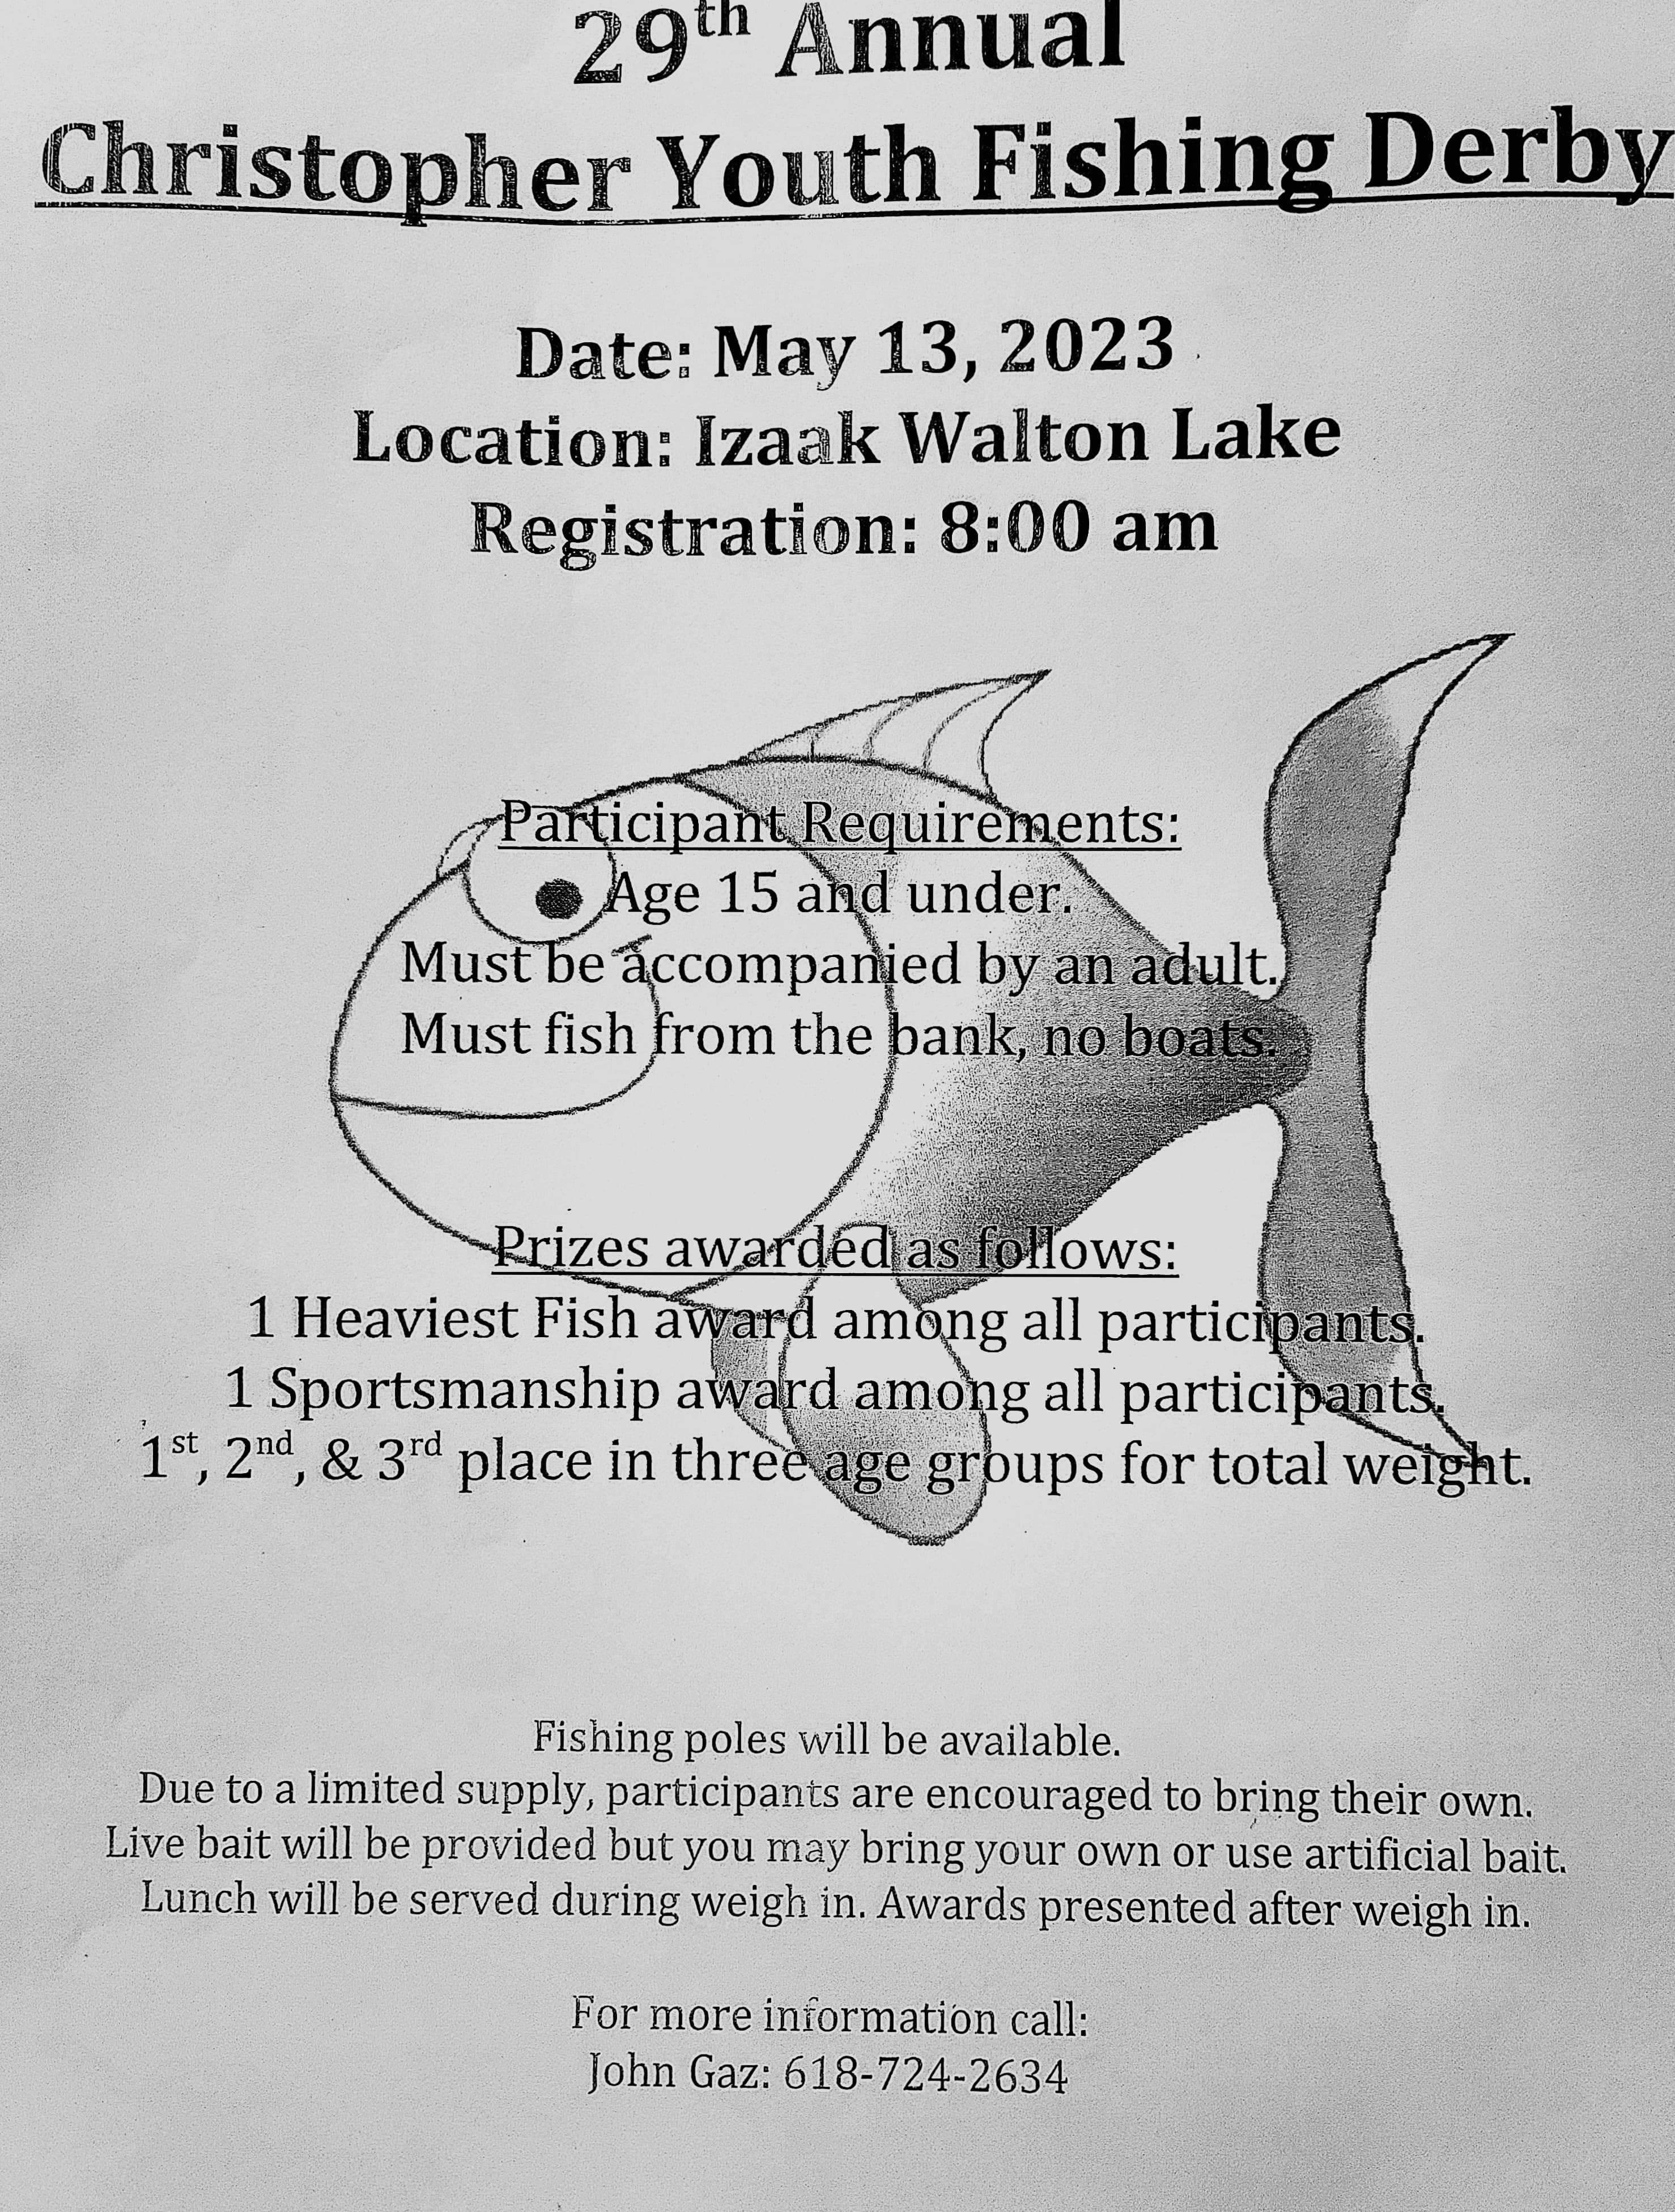 29th Annual Christopher Youth Fishing Derby